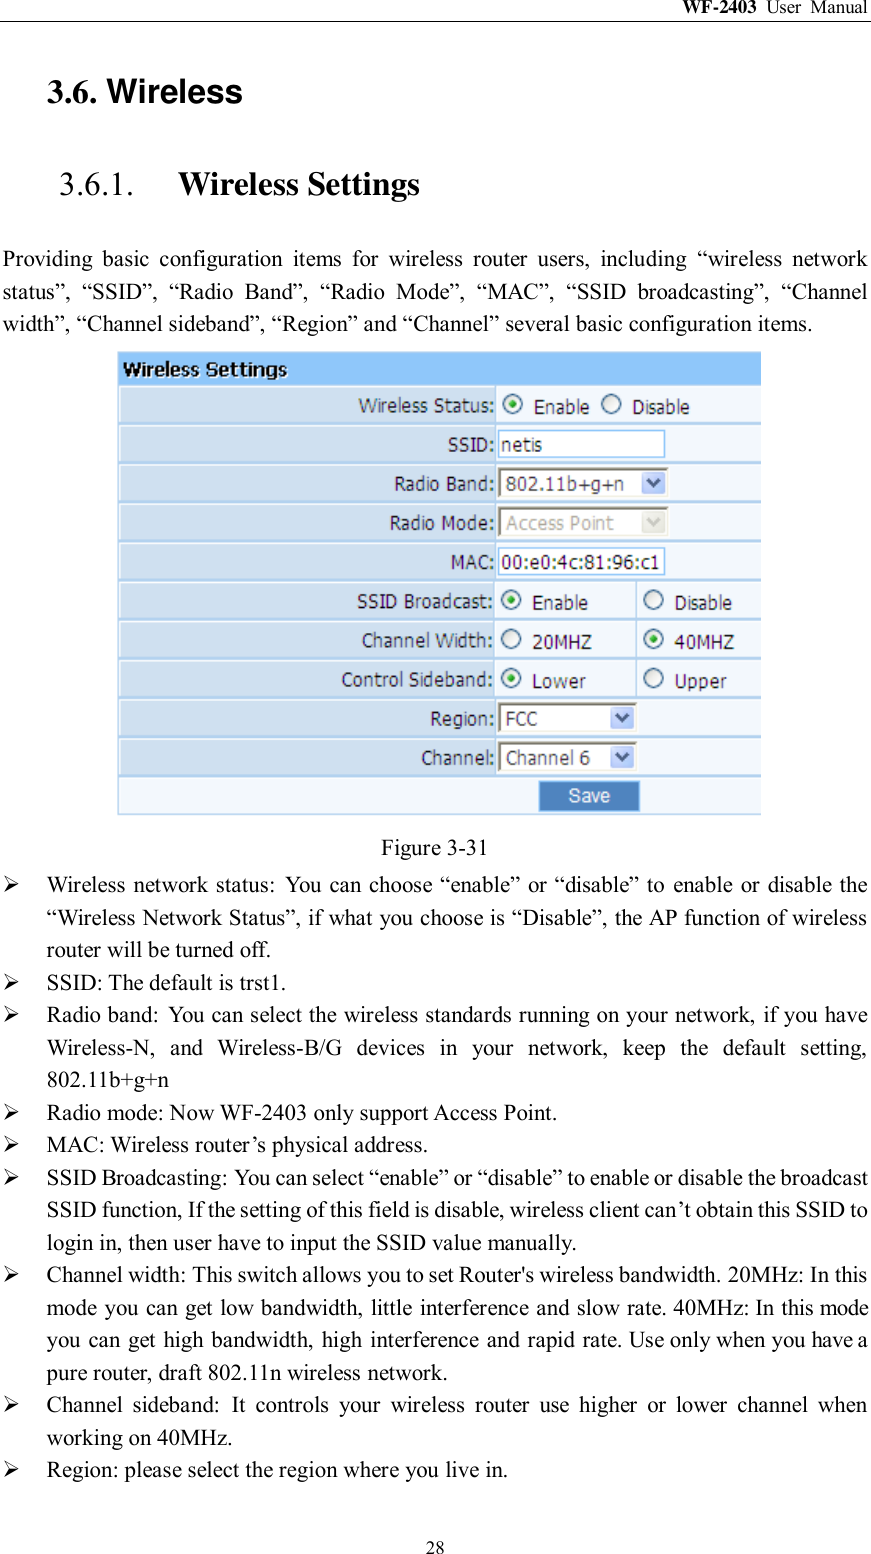 WF-2403  User  Manual  28 3.6. Wireless 3.6.1. Wireless Settings Providing  basic  configuration  items  for  wireless  router  users,  including  “wireless  network status”,  “SSID”,  “Radio  Band”,  “Radio  Mode”,  “MAC”,  “SSID  broadcasting”,  “Channel width”, “Channel sideband”, “Region” and “Channel” several basic configuration items.  Figure 3-31  Wireless network status:  You can choose “enable” or “disable” to  enable  or disable the “Wireless Network Status”, if what you choose is “Disable”, the AP function of wireless router will be turned off.  SSID: The default is trst1.  Radio band:  You can select the wireless standards running on your network, if you have Wireless-N,  and  Wireless-B/G  devices  in  your  network,  keep  the  default  setting, 802.11b+g+n  Radio mode: Now WF-2403 only support Access Point.  MAC: Wireless router‟s physical address.  SSID Broadcasting: You can select “enable” or “disable” to enable or disable the broadcast SSID function, If the setting of this field is disable, wireless client can‟t obtain this SSID to login in, then user have to input the SSID value manually.  Channel width: This switch allows you to set Router&apos;s wireless bandwidth. 20MHz: In this mode you can get low bandwidth, little interference and slow rate. 40MHz: In this mode you can get high bandwidth, high interference and rapid rate. Use only when you have a pure router, draft 802.11n wireless network.  Channel  sideband:  It  controls  your  wireless  router  use  higher  or  lower  channel  when working on 40MHz.  Region: please select the region where you live in. 